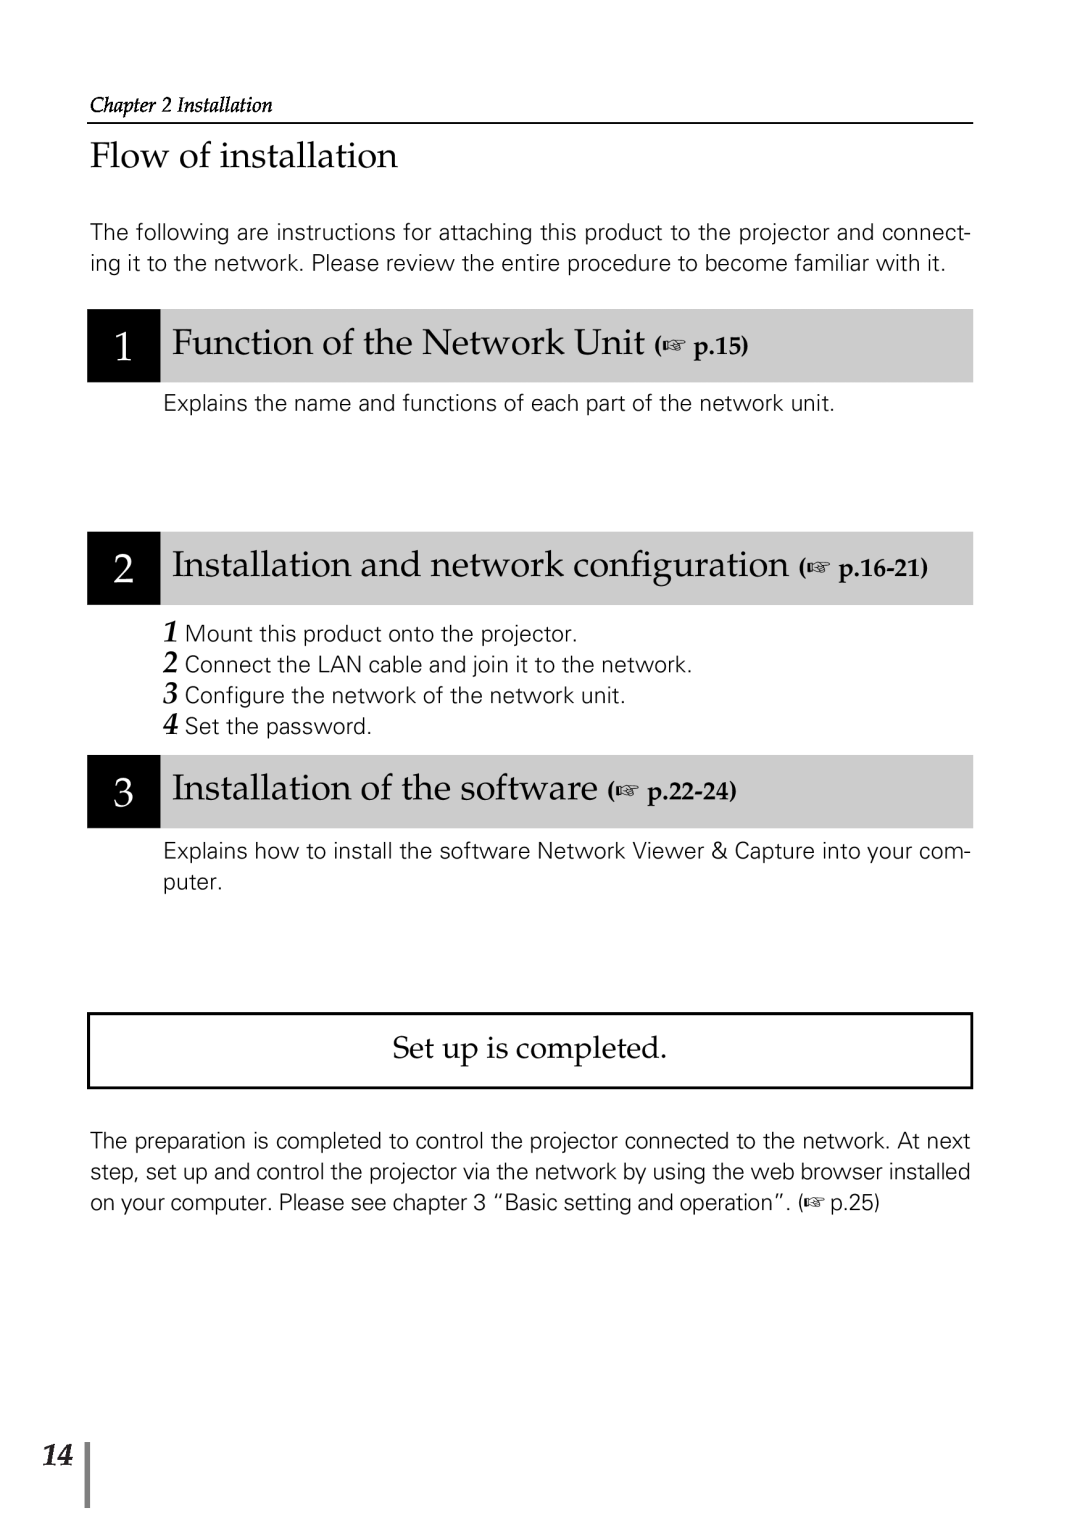 Sanyo POA-PN02 Flow of installation, Function of the Network Unit p.15, Installation and network configuration p.16-21 